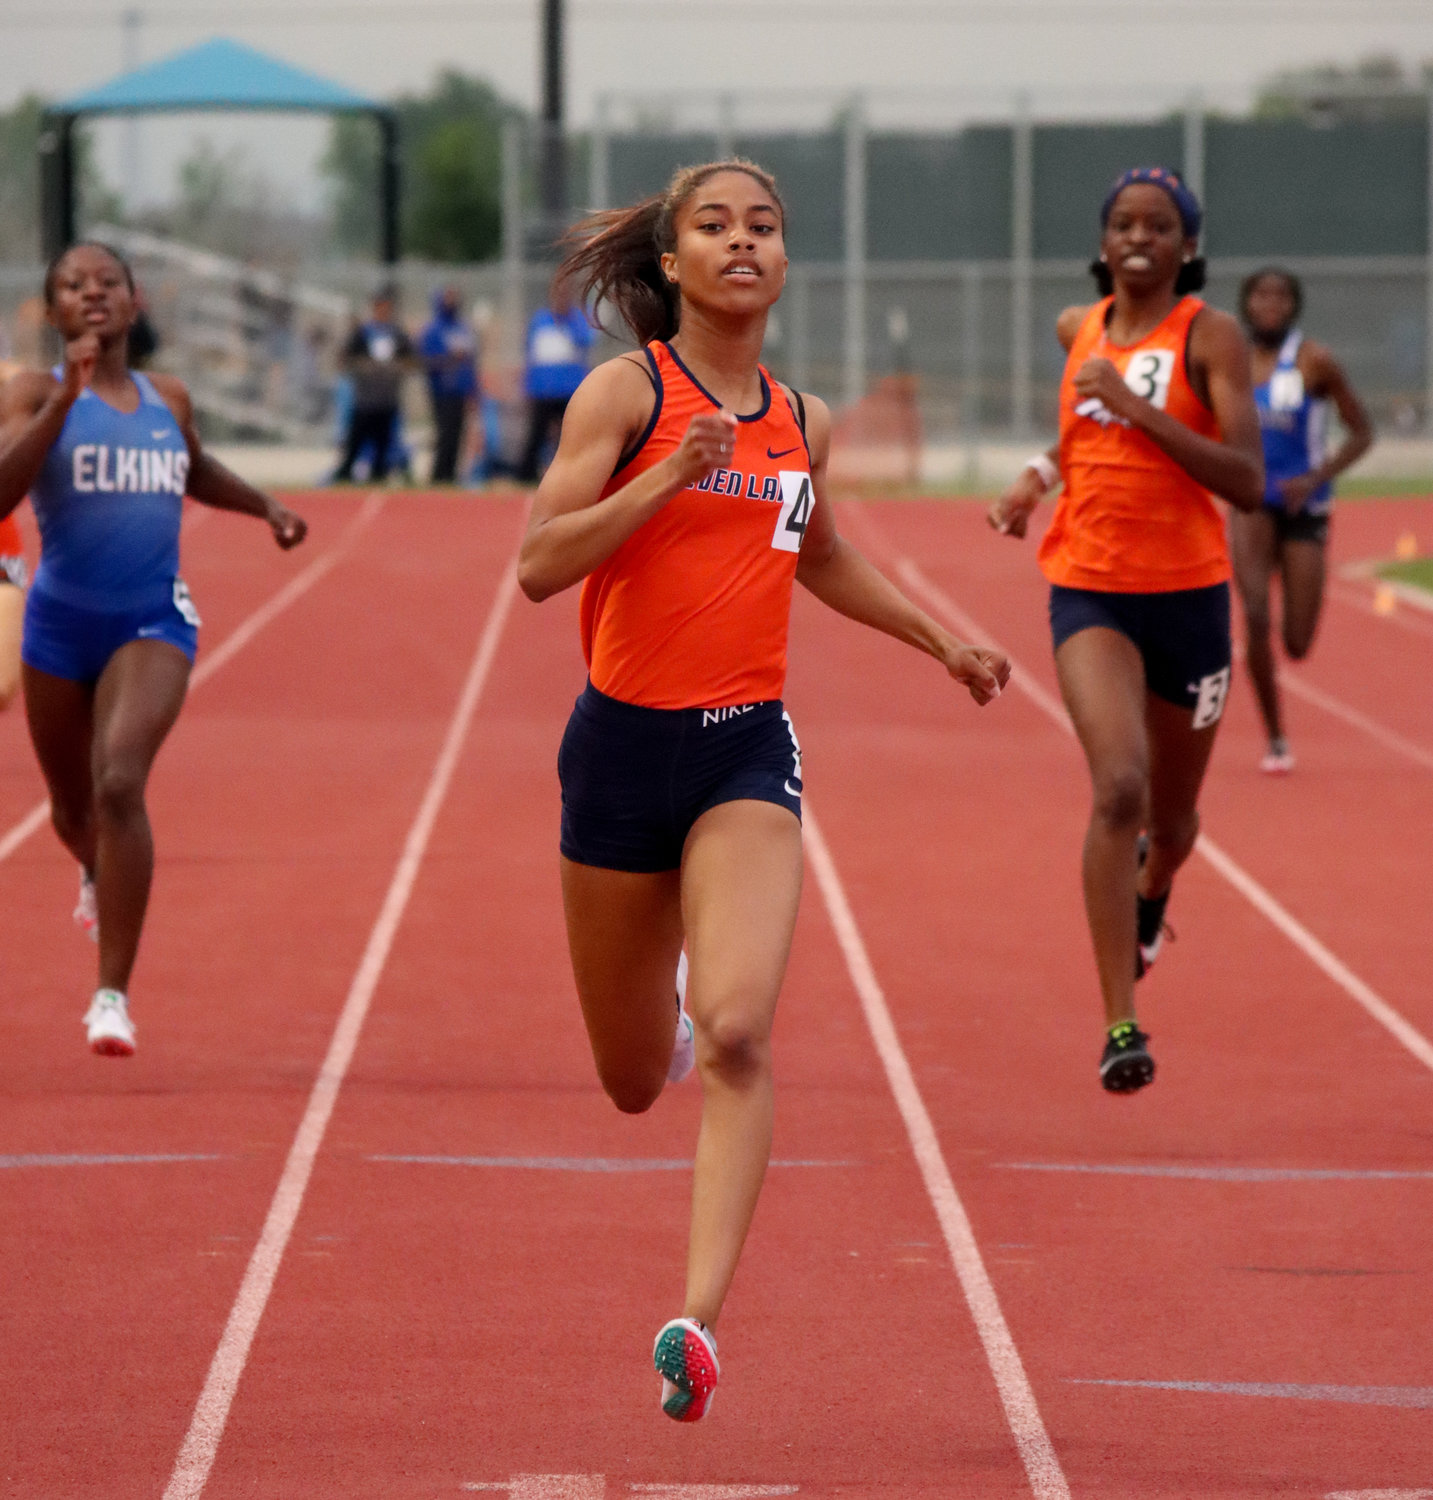 Seven Lakes junior Haley Tate is the anchor for Seven Lakes' top-seeded 4x400 relay and No. 3-seeded 4x100 relay, and is also the No. 2 seed in the 400-meter dash heading into the Class 6A state track and field meet Saturday, May 8, at Mike A. Myers Stadium at the University of Texas in Austin.